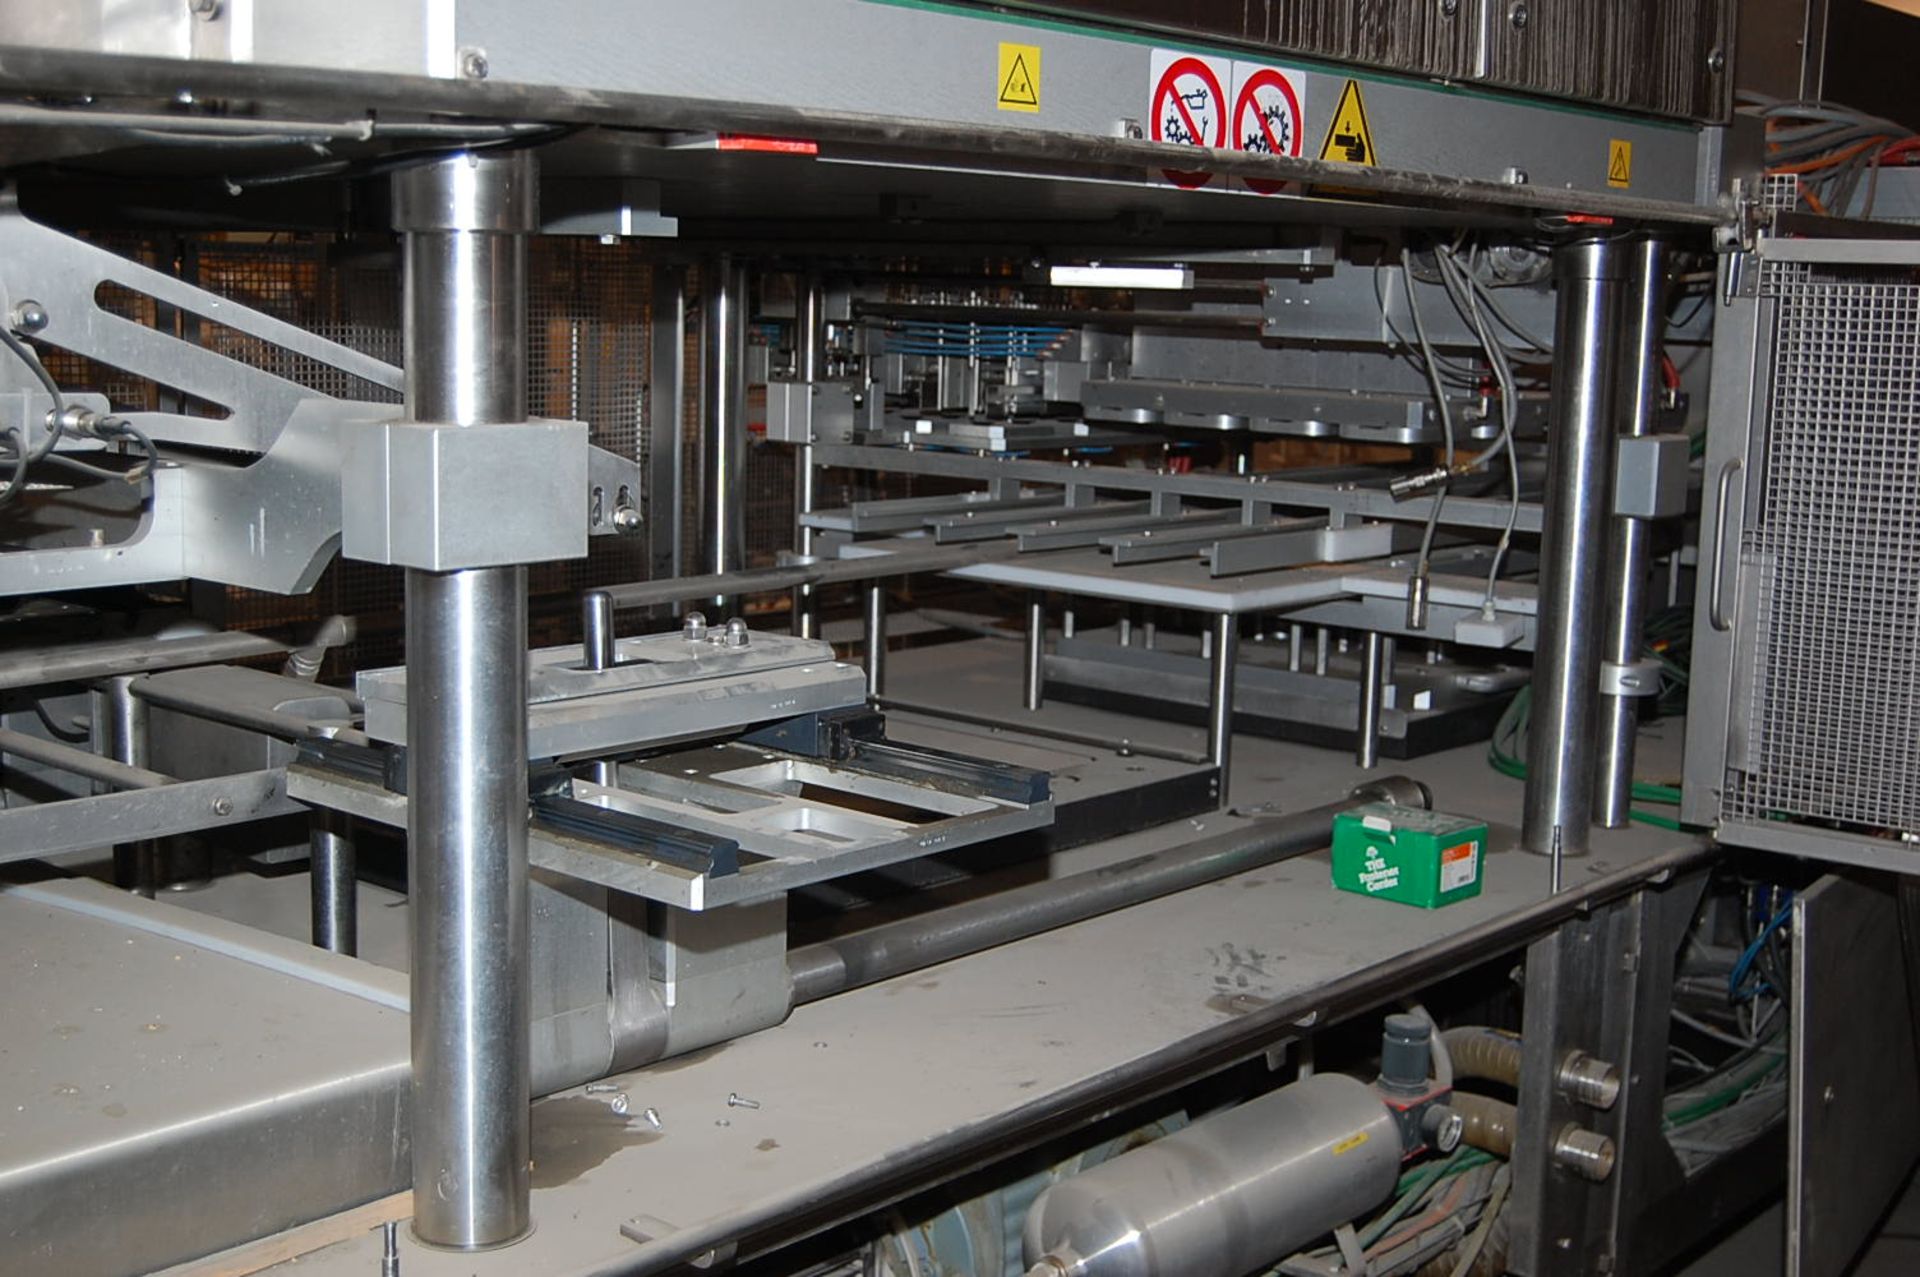 Mondini Heat Seal Packaging Machine, Base, Parts, Components - Only Rigging fee: $1400 - Image 3 of 4